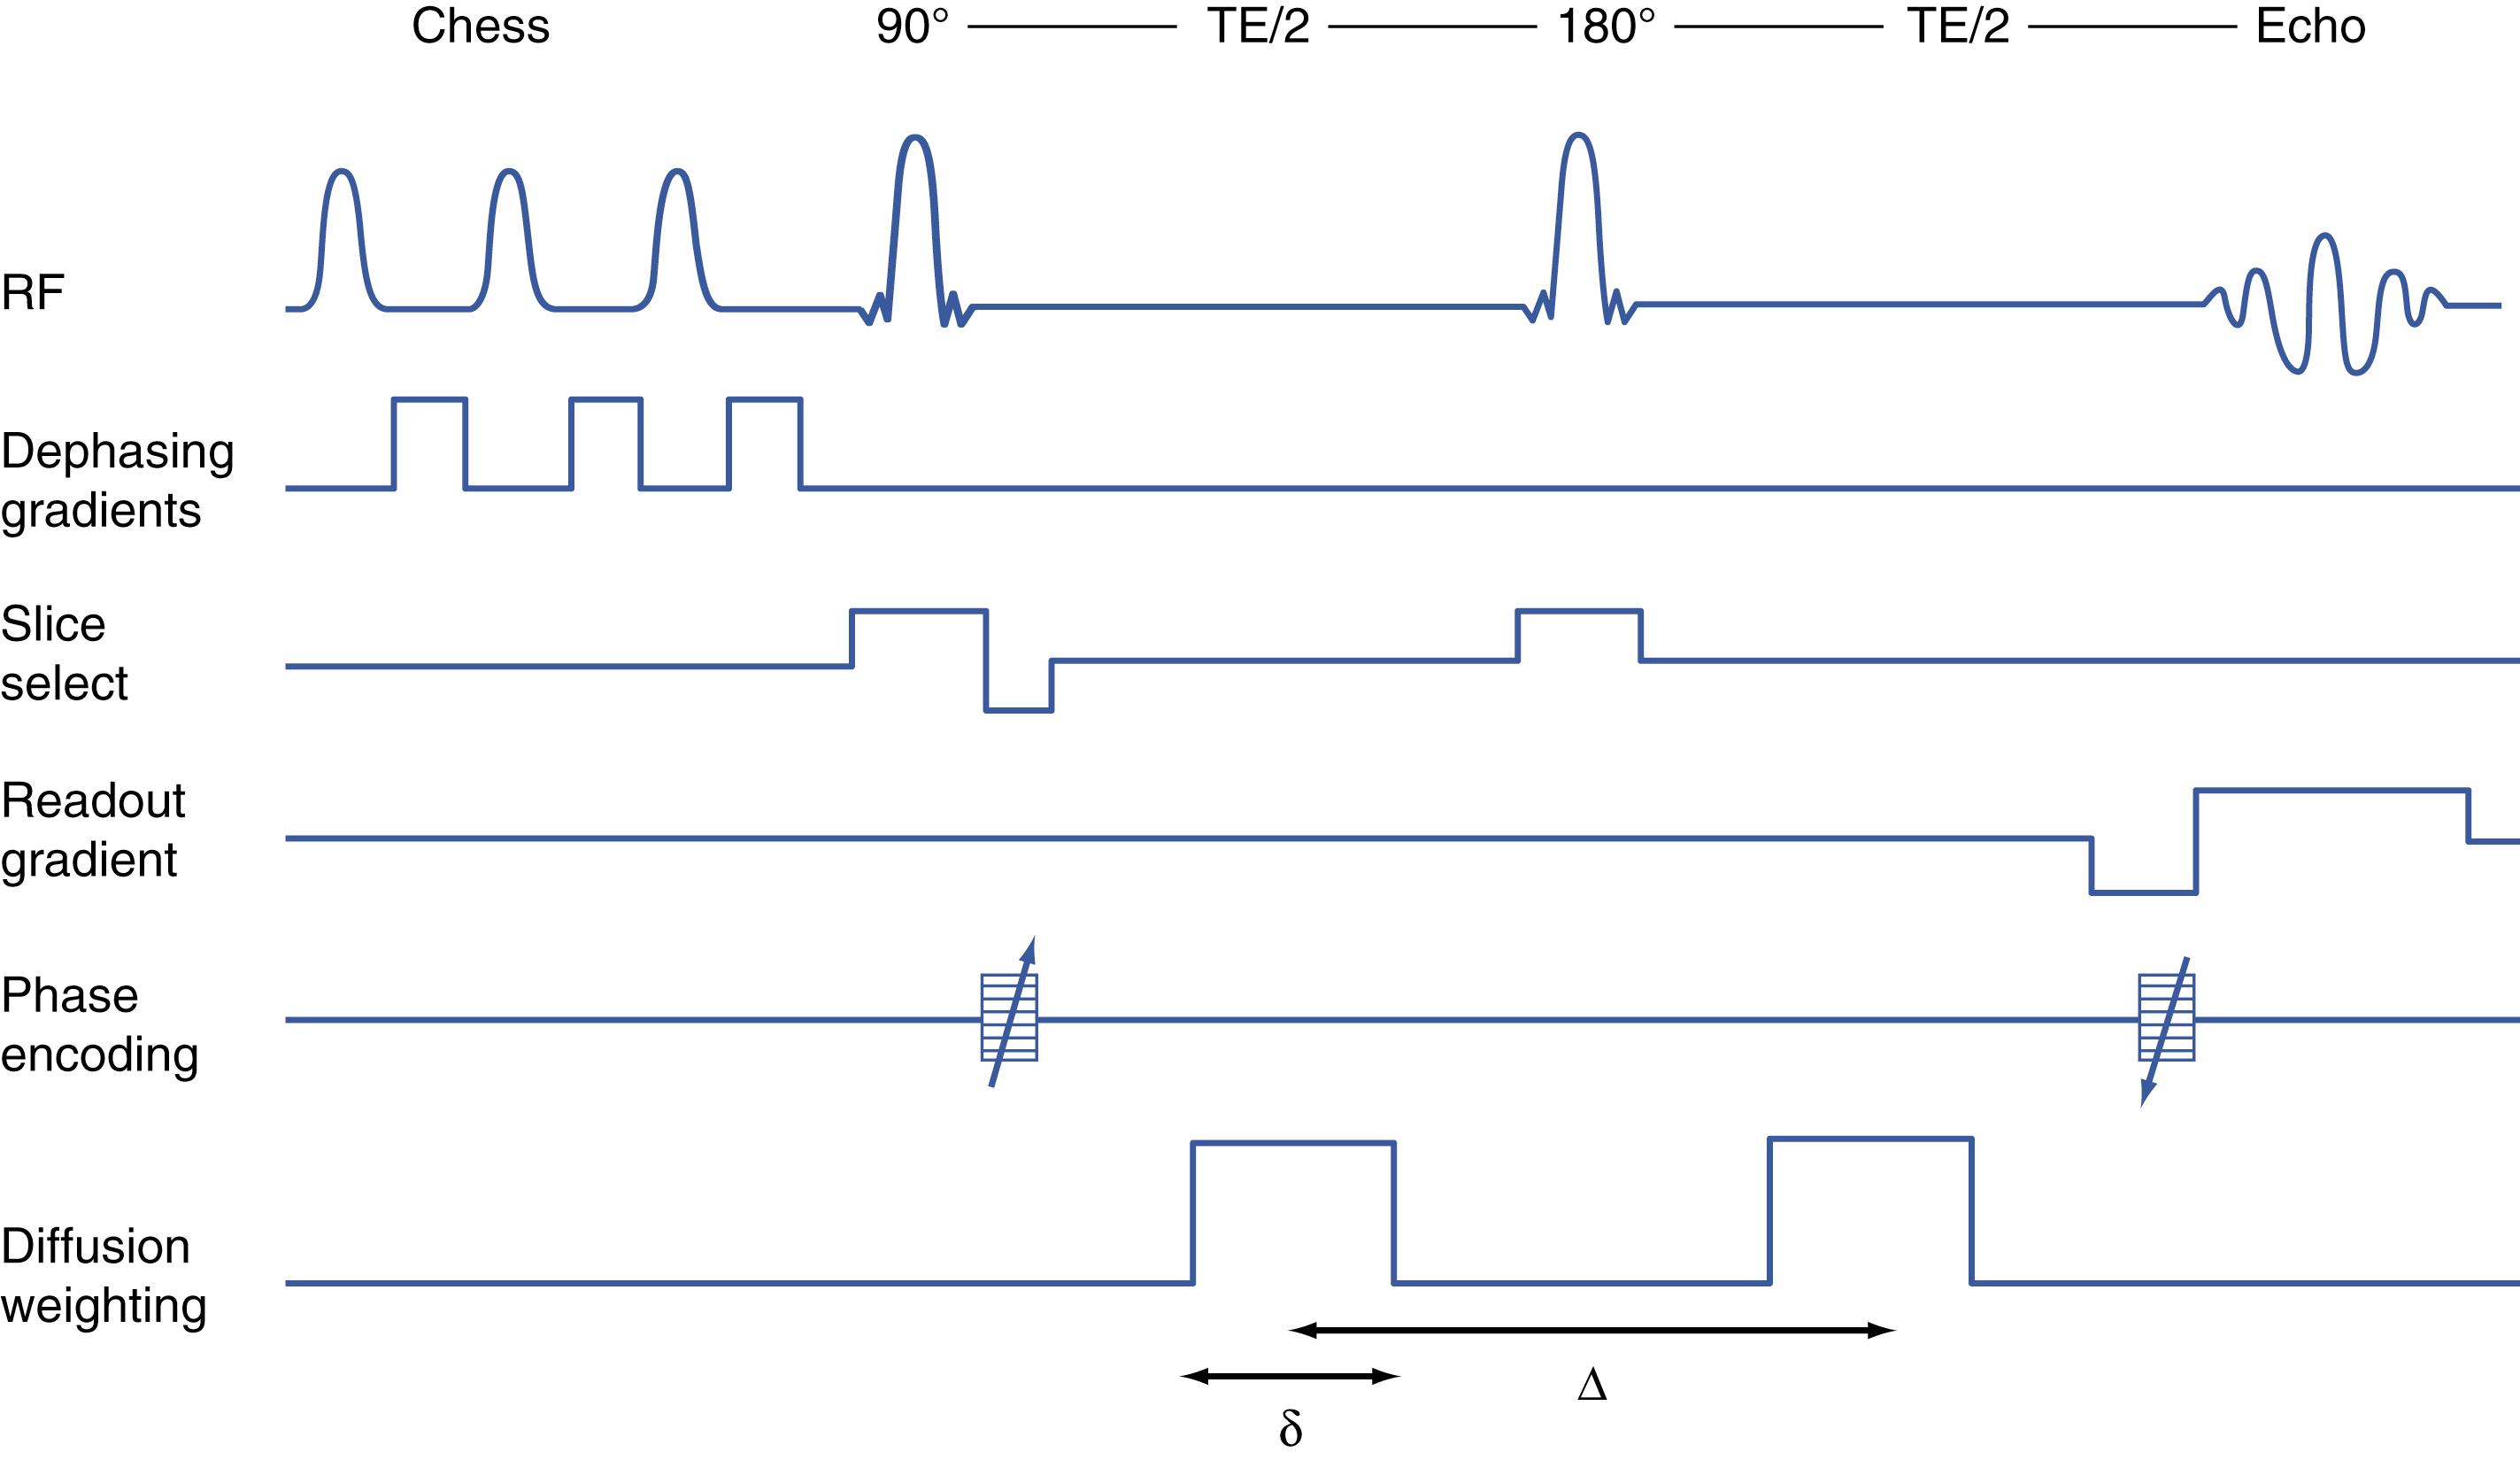 Figure 14.3, Radiofrequency (RF) and gradient pulse timing of the spin echo sequence modified to incorporate fat suppression and diffusion weighting.